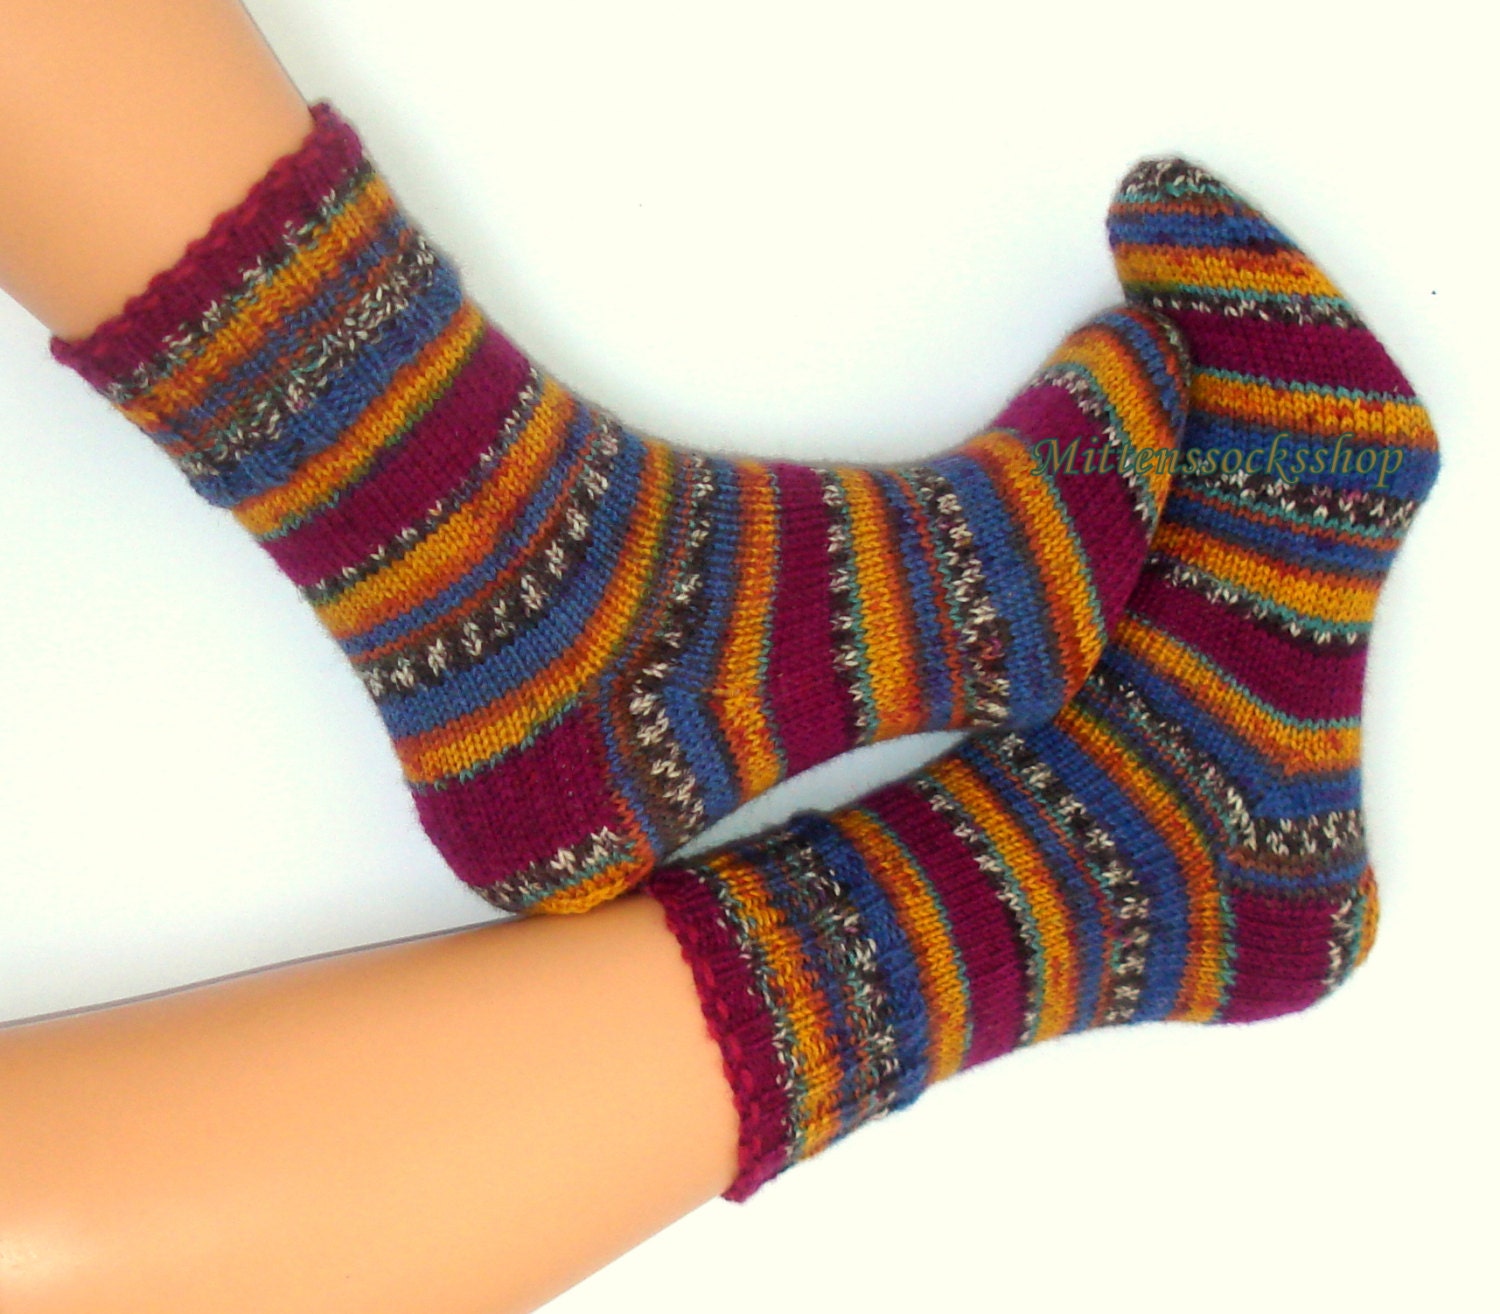 Hand knitted wool socks Warm elegant colorful by MittensSocksShop